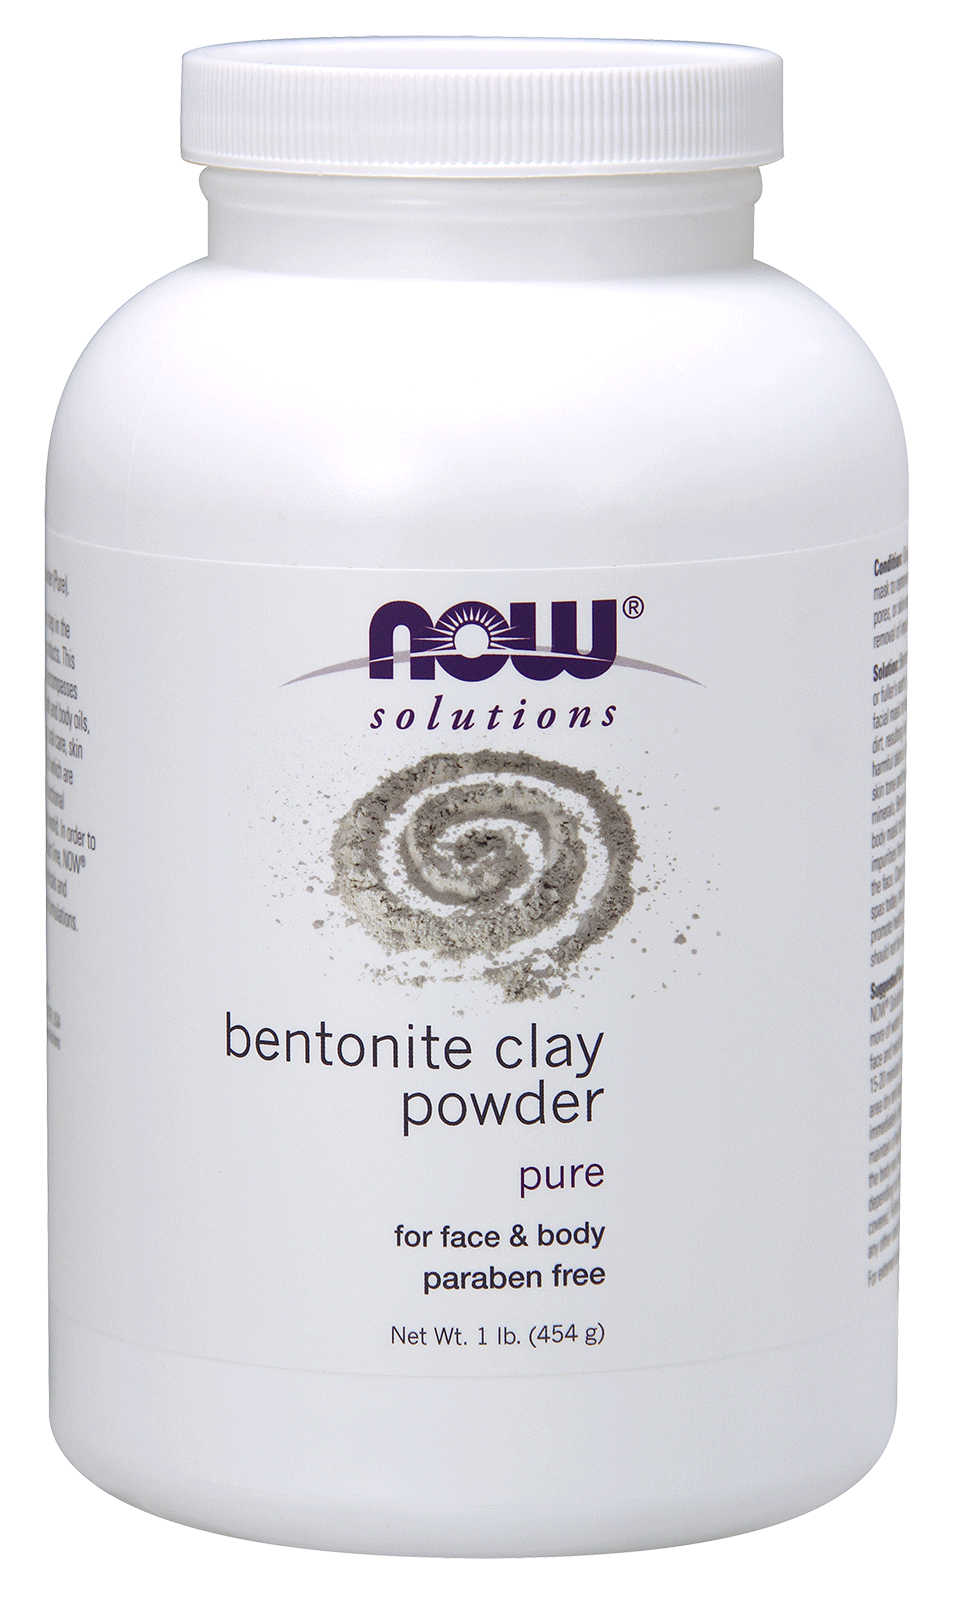 Container of NOW Solutions bentonite clay powder. Pure, for face and body, paraben free. 1 lb., 454 g.